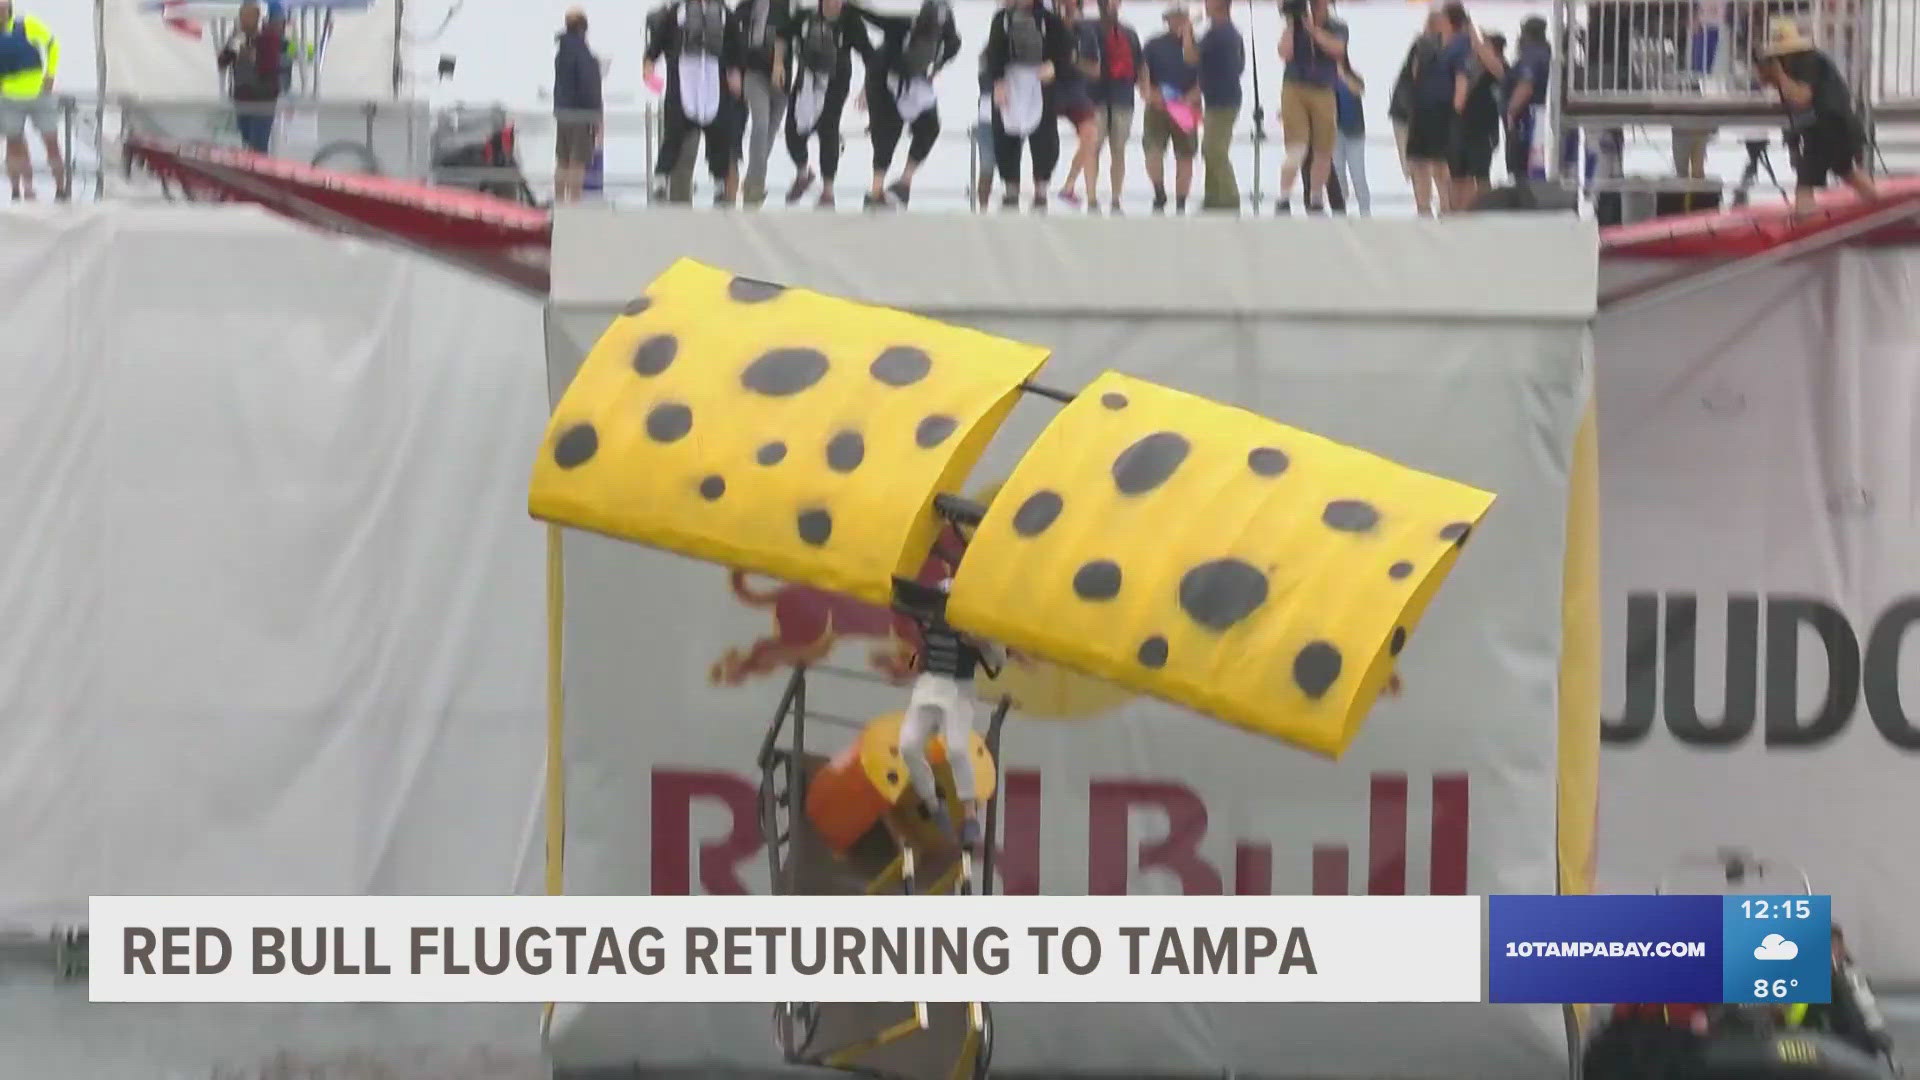 Competitors will "fly" off a 27-foot-tall deck on their homemade flying machines into the water in front of the Tampa Convention Center.